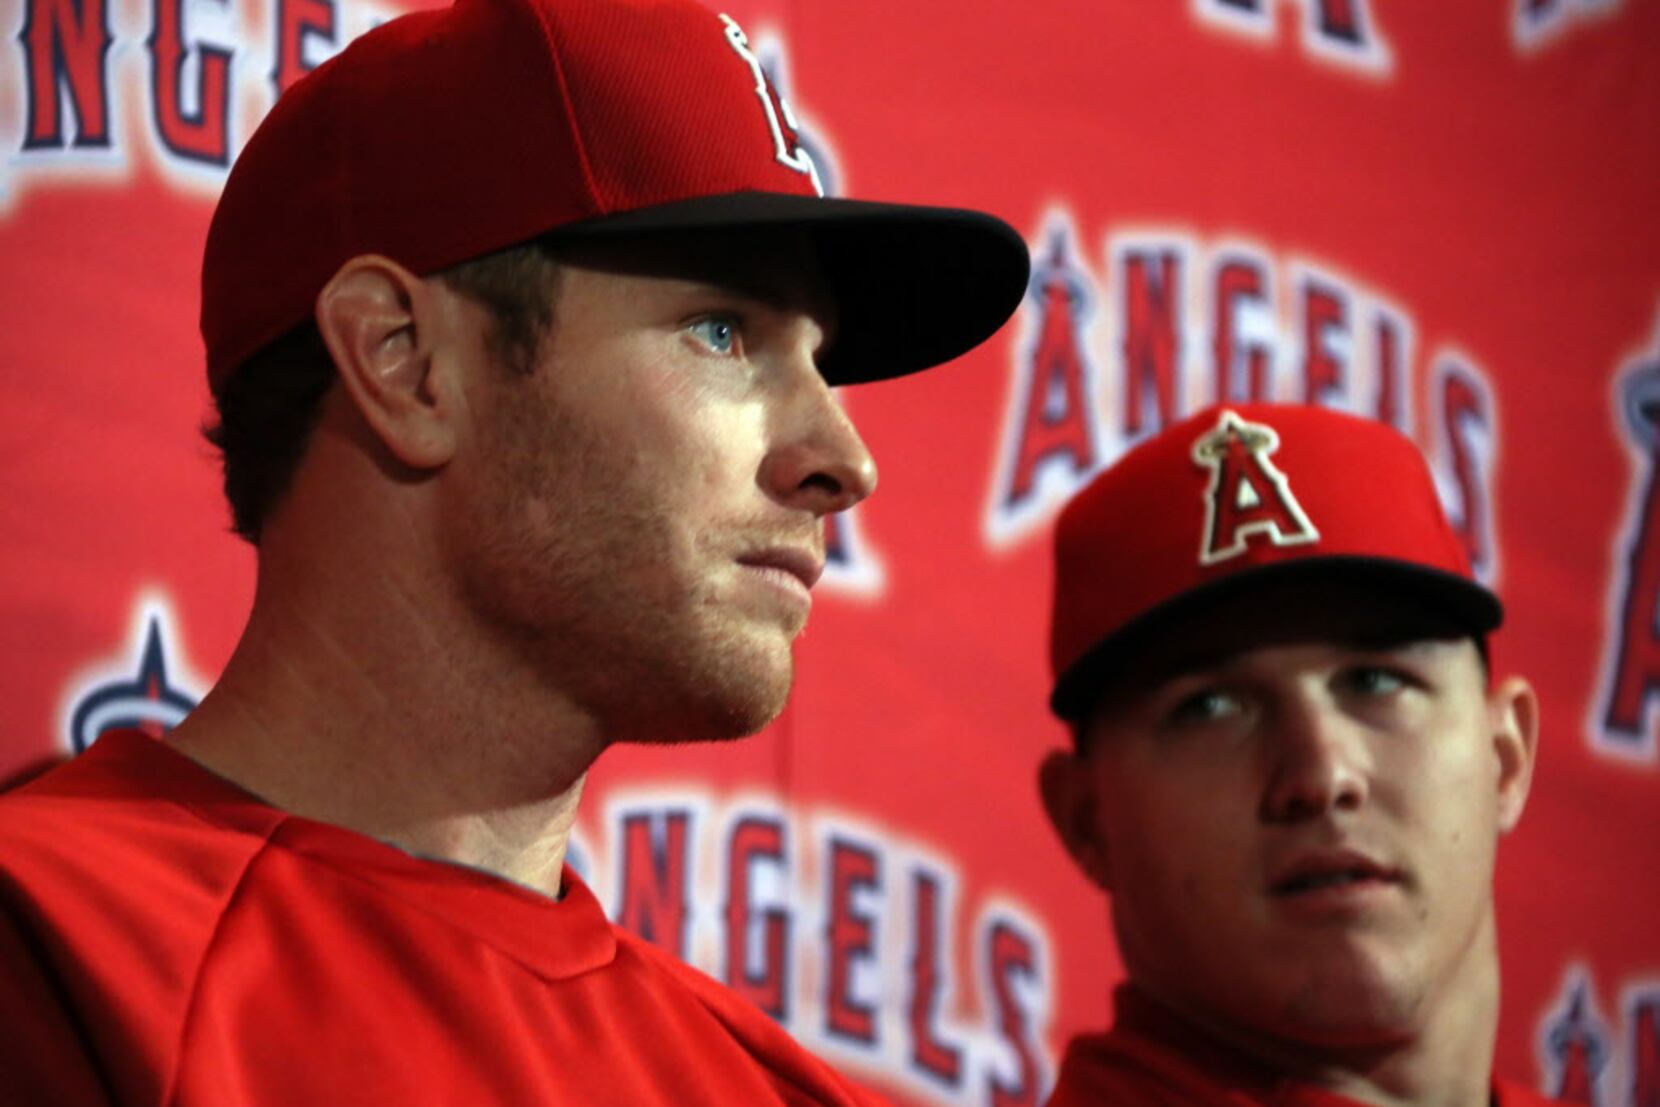 Rangers fans boo Josh Hamilton, who could be moving on